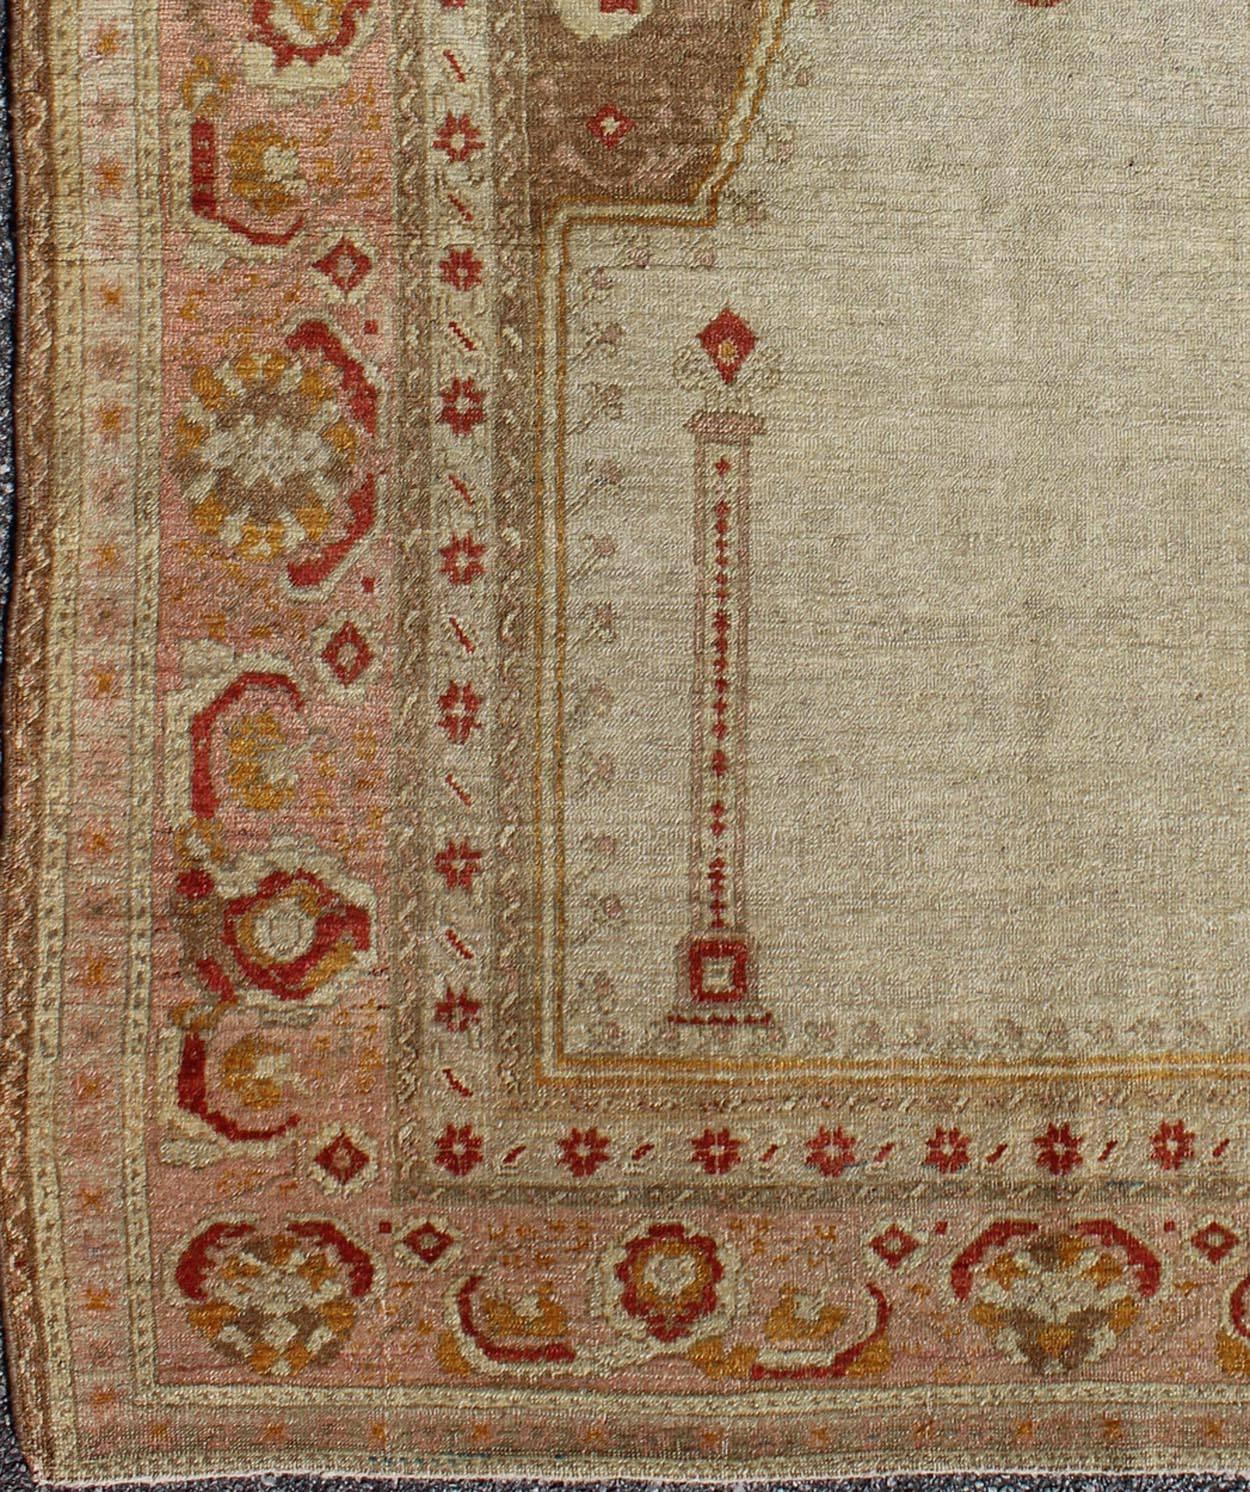 Antique Turkish Sivas prayer rug with floral design in ivory, taupe, and pink, rug d-1007, country of origin / type: Turkey/Oushak, circa mid-20th century

This lovely and finely woven Turkish Oushak rug displays a prayer design set on an ivory